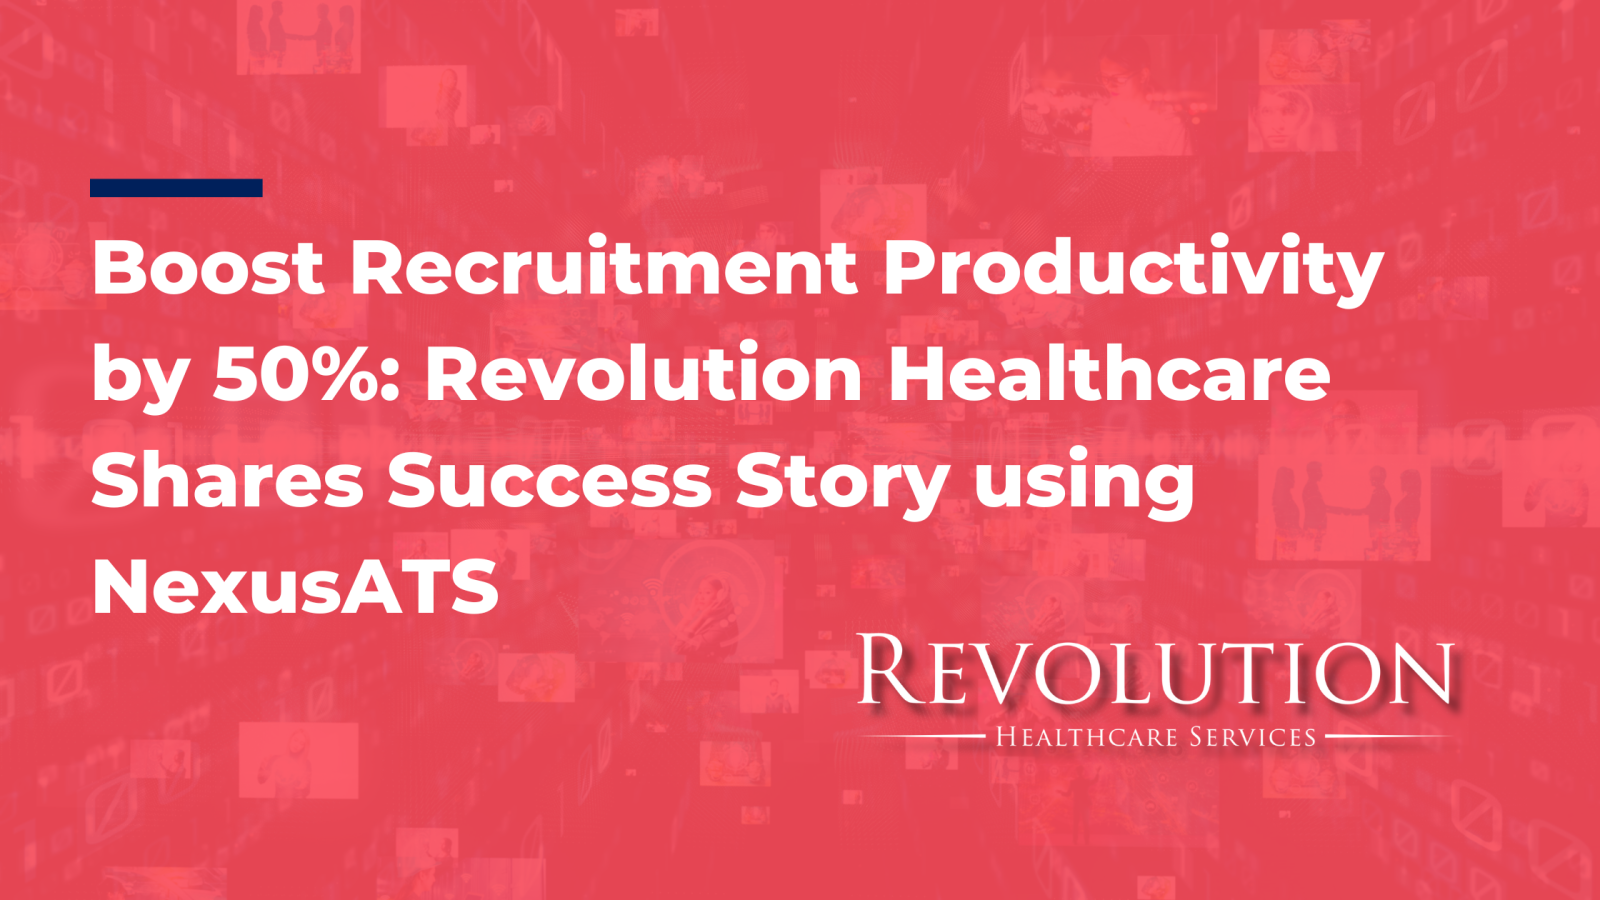 Boost Recruitment Productivity by 50%: Revolution Healthcare Shares Success Story using NexusATS